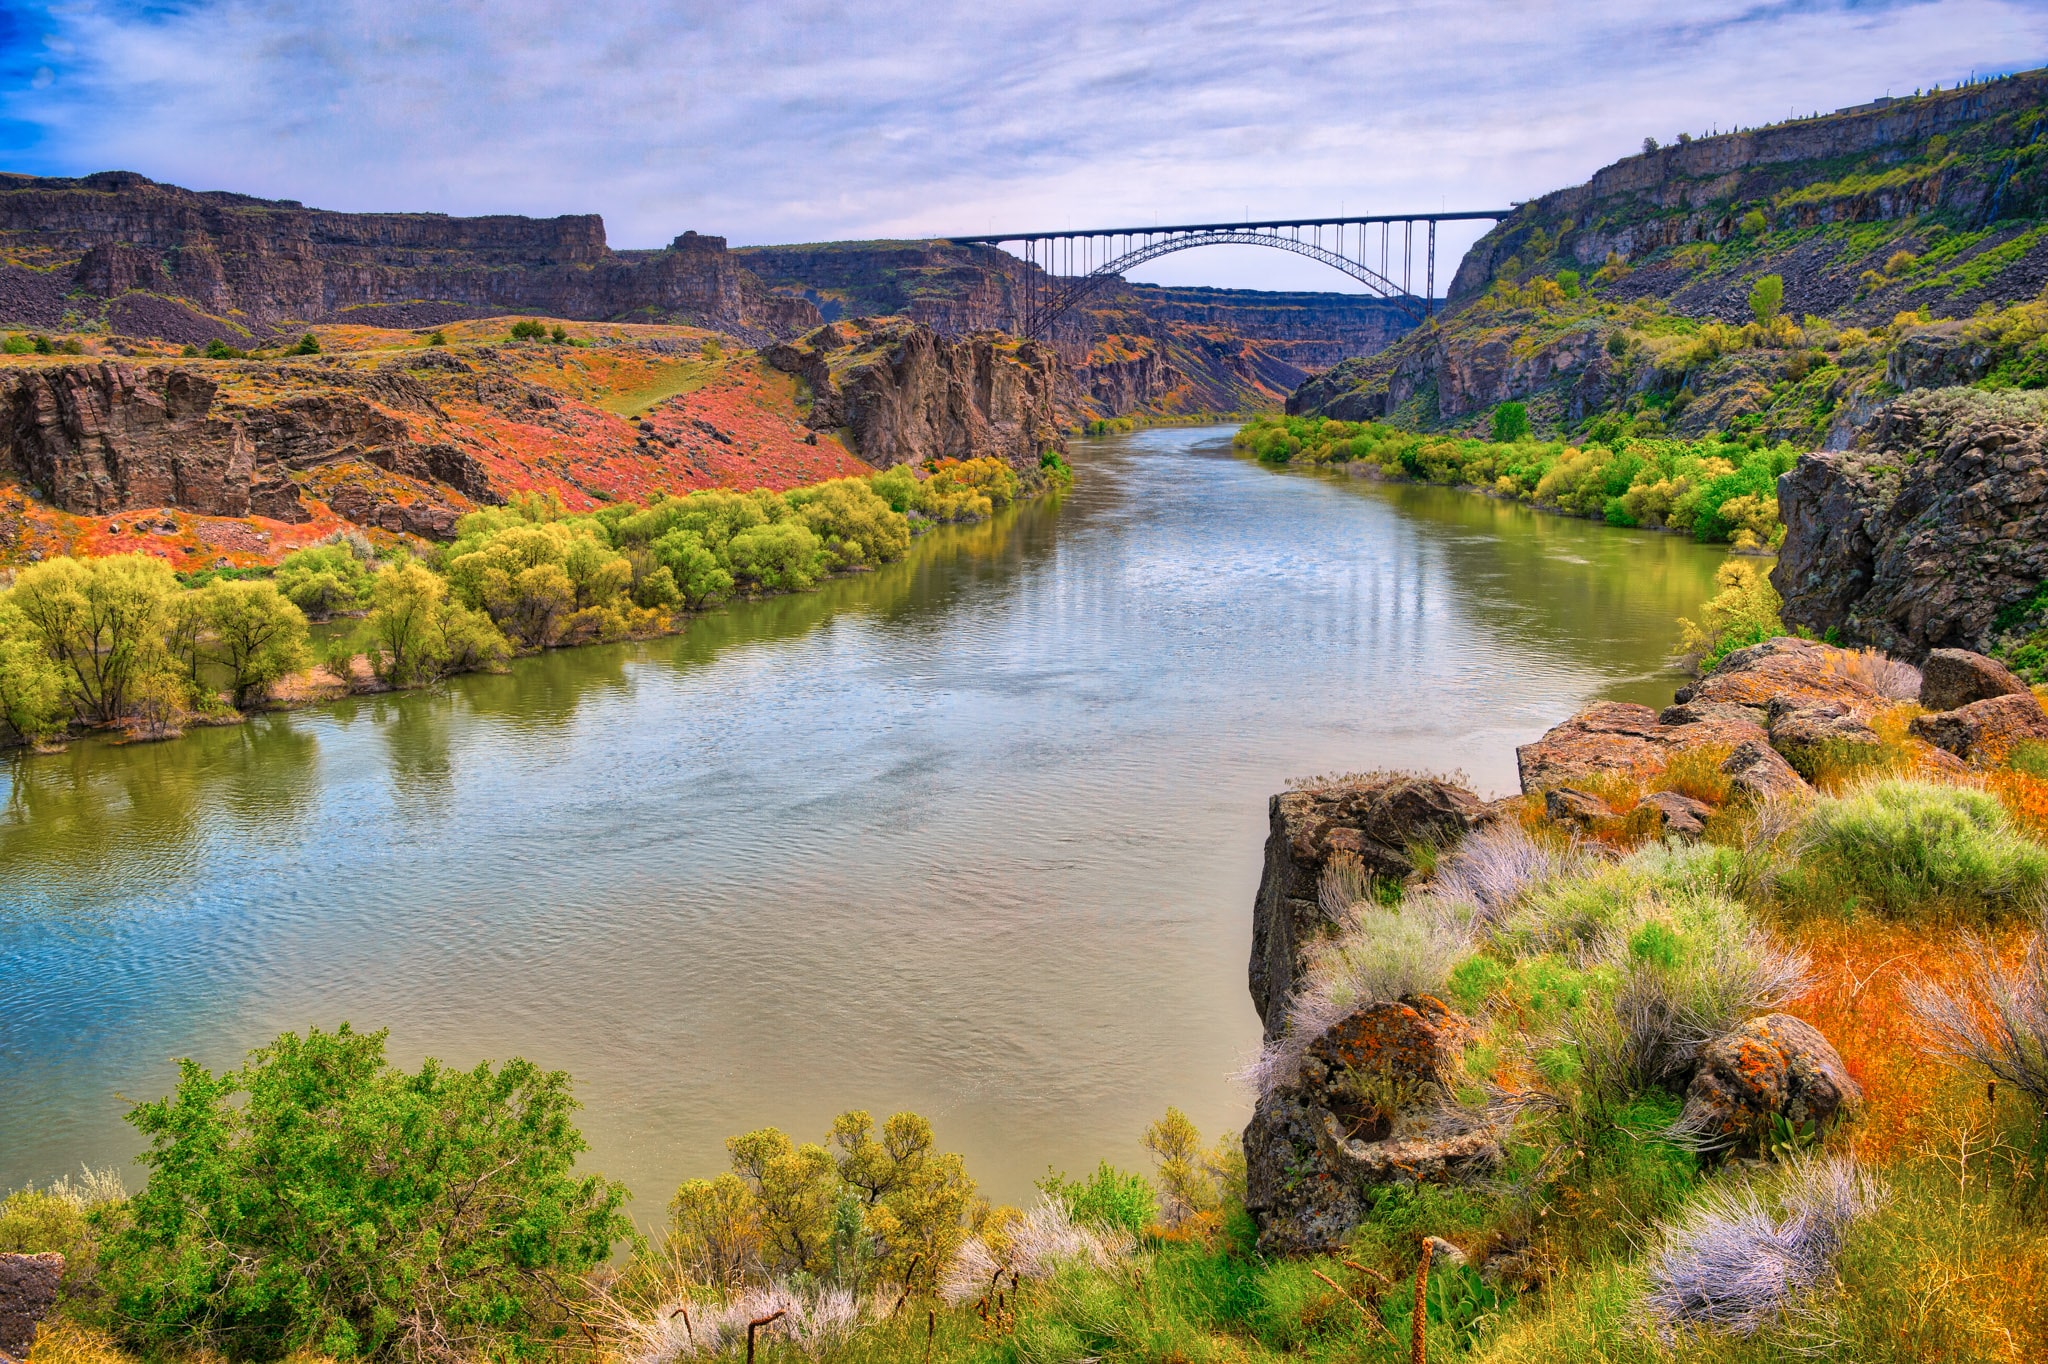 The Perrine Bridge is a truss arch bridge that spans the Snake River Canyon on US Highway 93 in Twin Falls, Idaho. The bridge is 1,500 feet long and has a pedestrian walkway.